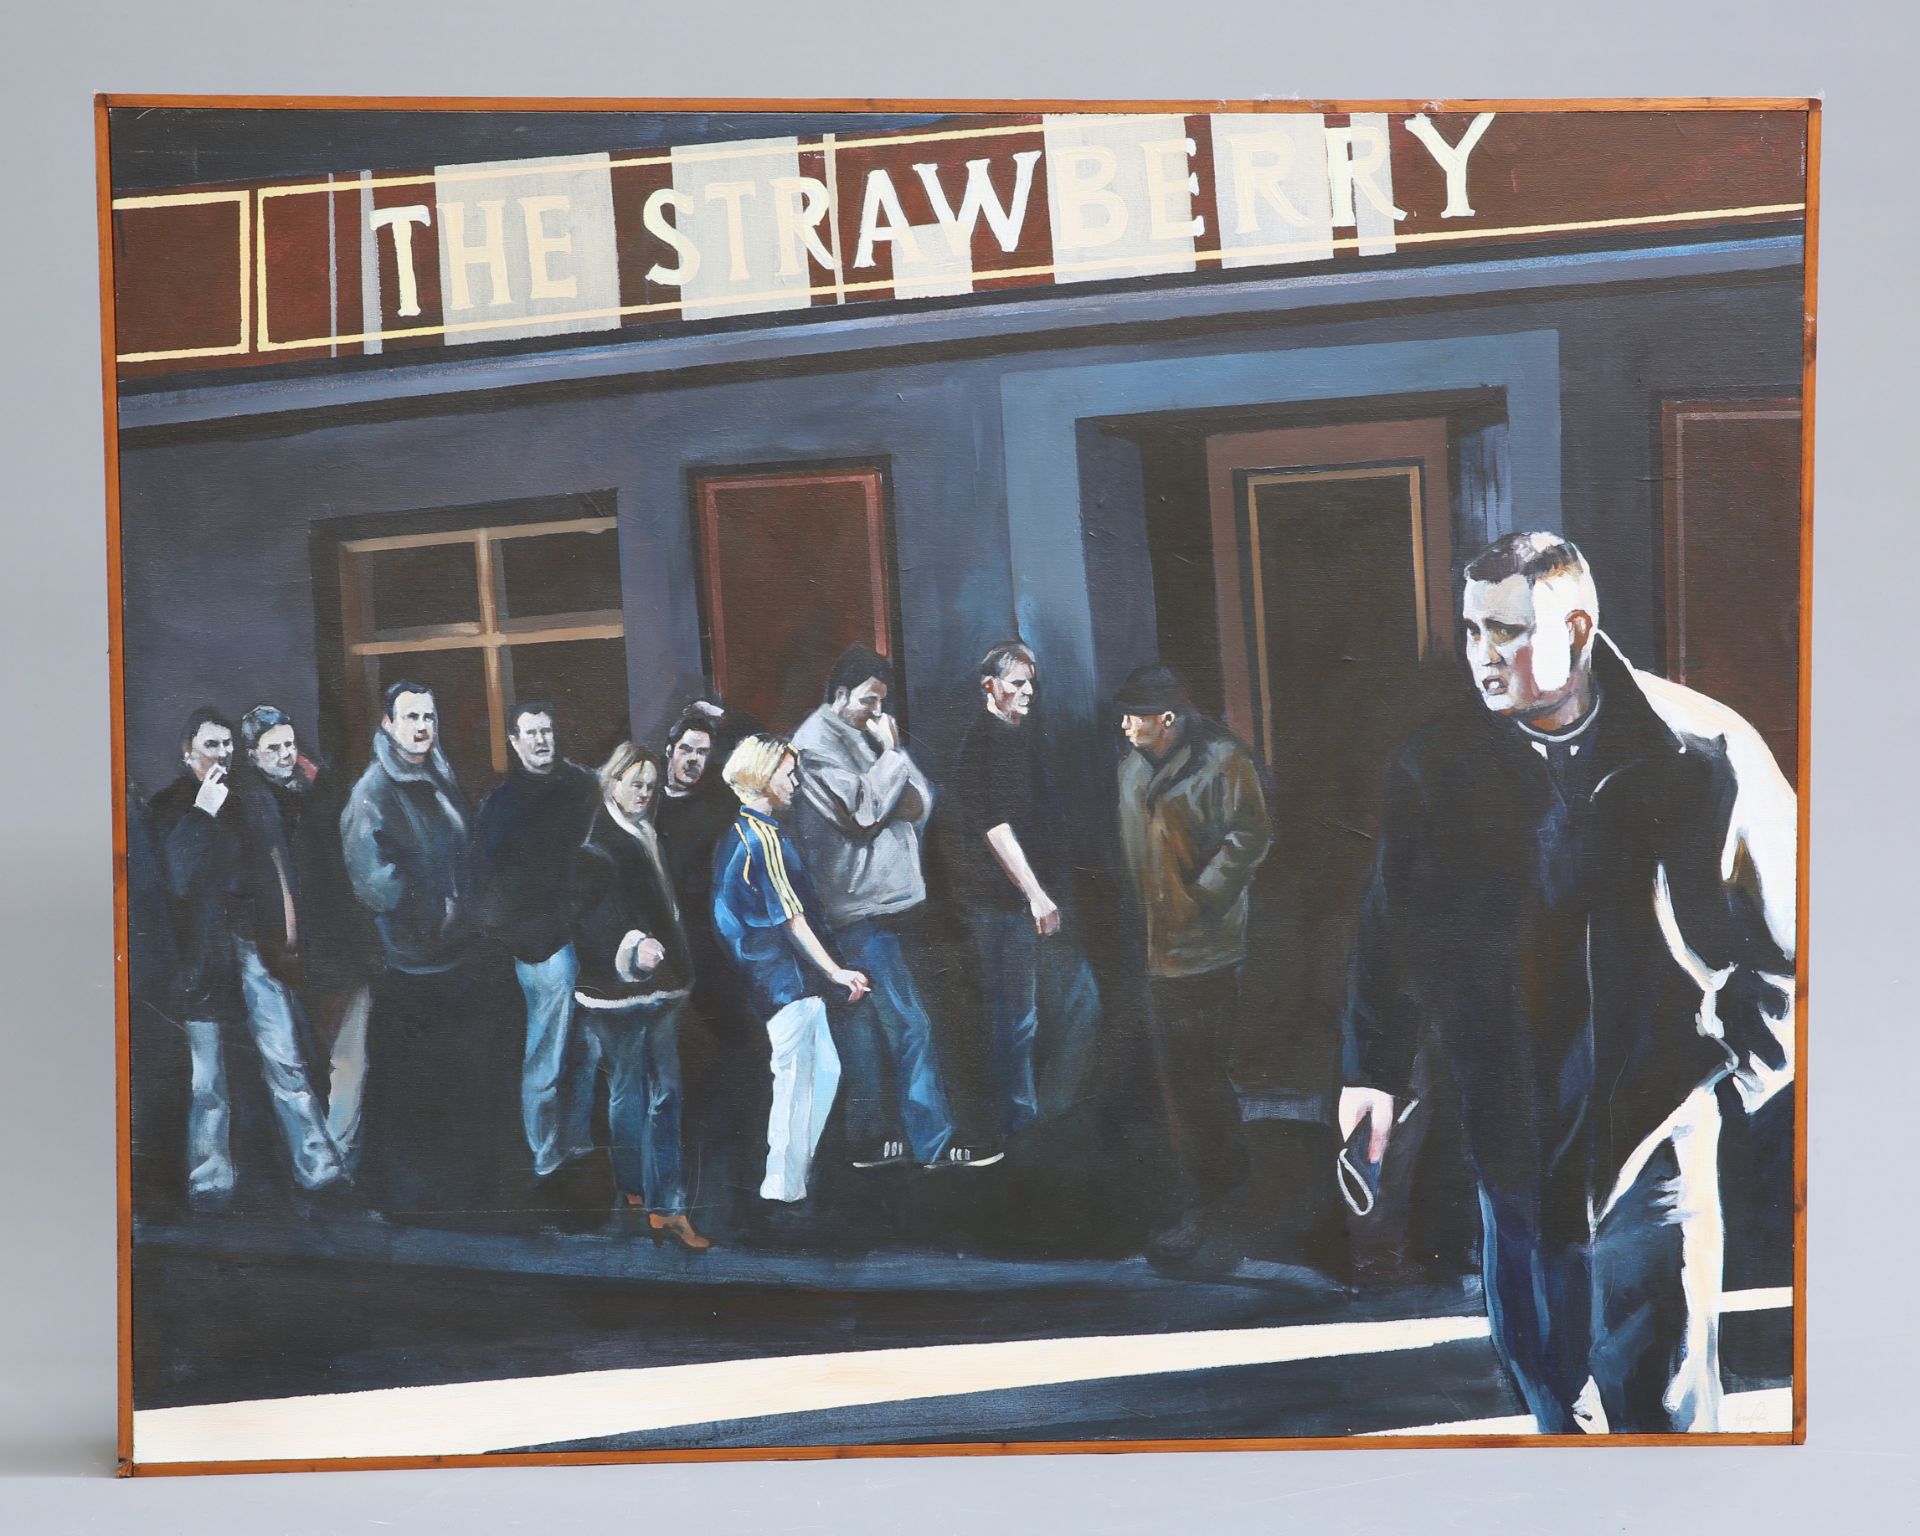 GAVIN PENN (CONTEMPORARY), NEWCASTLE UNITED FANS QUEING OUTSIDE THE STRAWBERRY PUB, signed lower